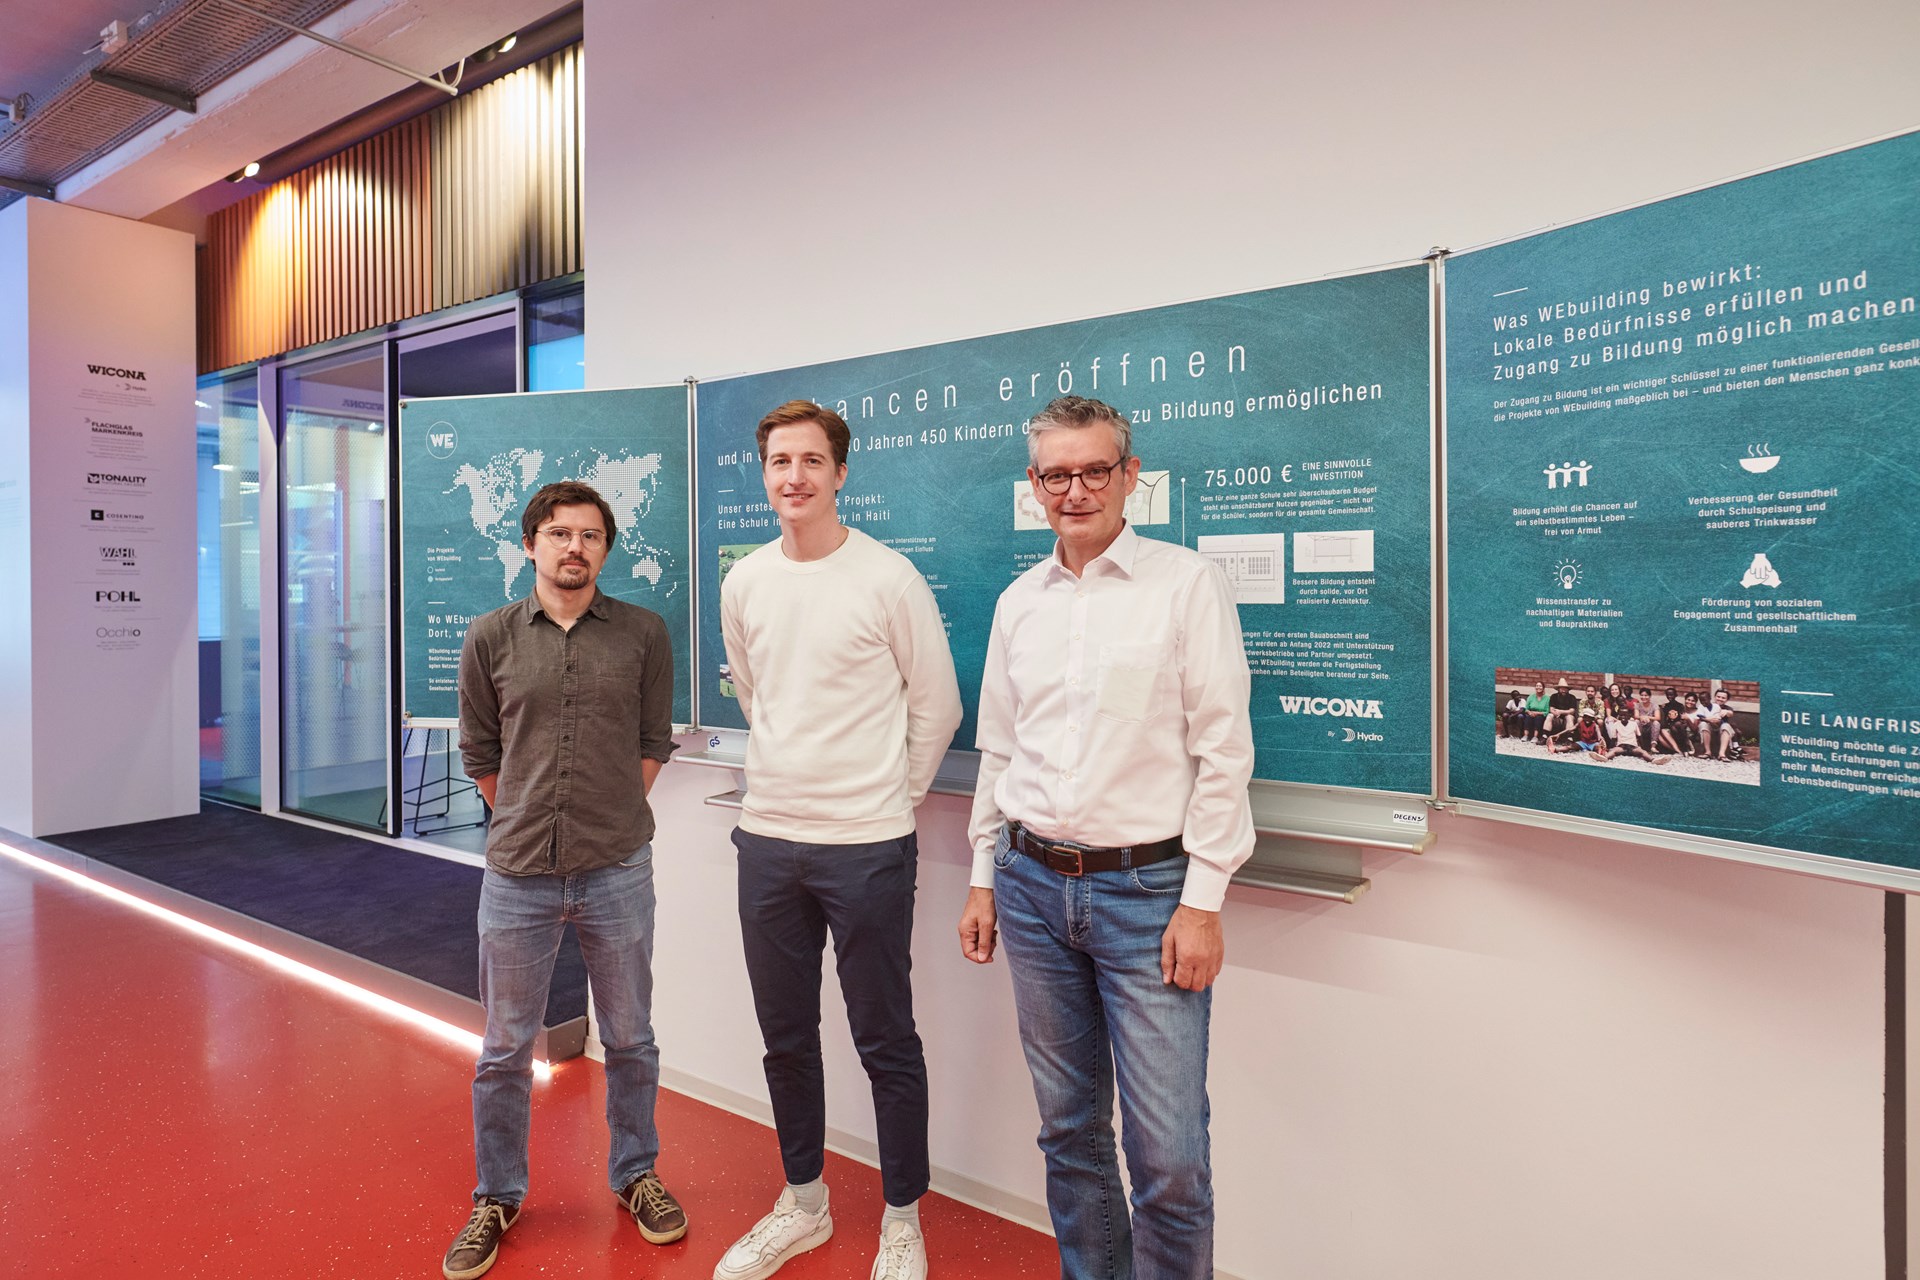 Photo (left to right): Ivan Rališ (Architect and Co-founder of WEbuilding), Florian Schlummer (Architect and member of WEbuilding) and Ralf Seufert (Vice President North Europe, Hydro Building Systems)